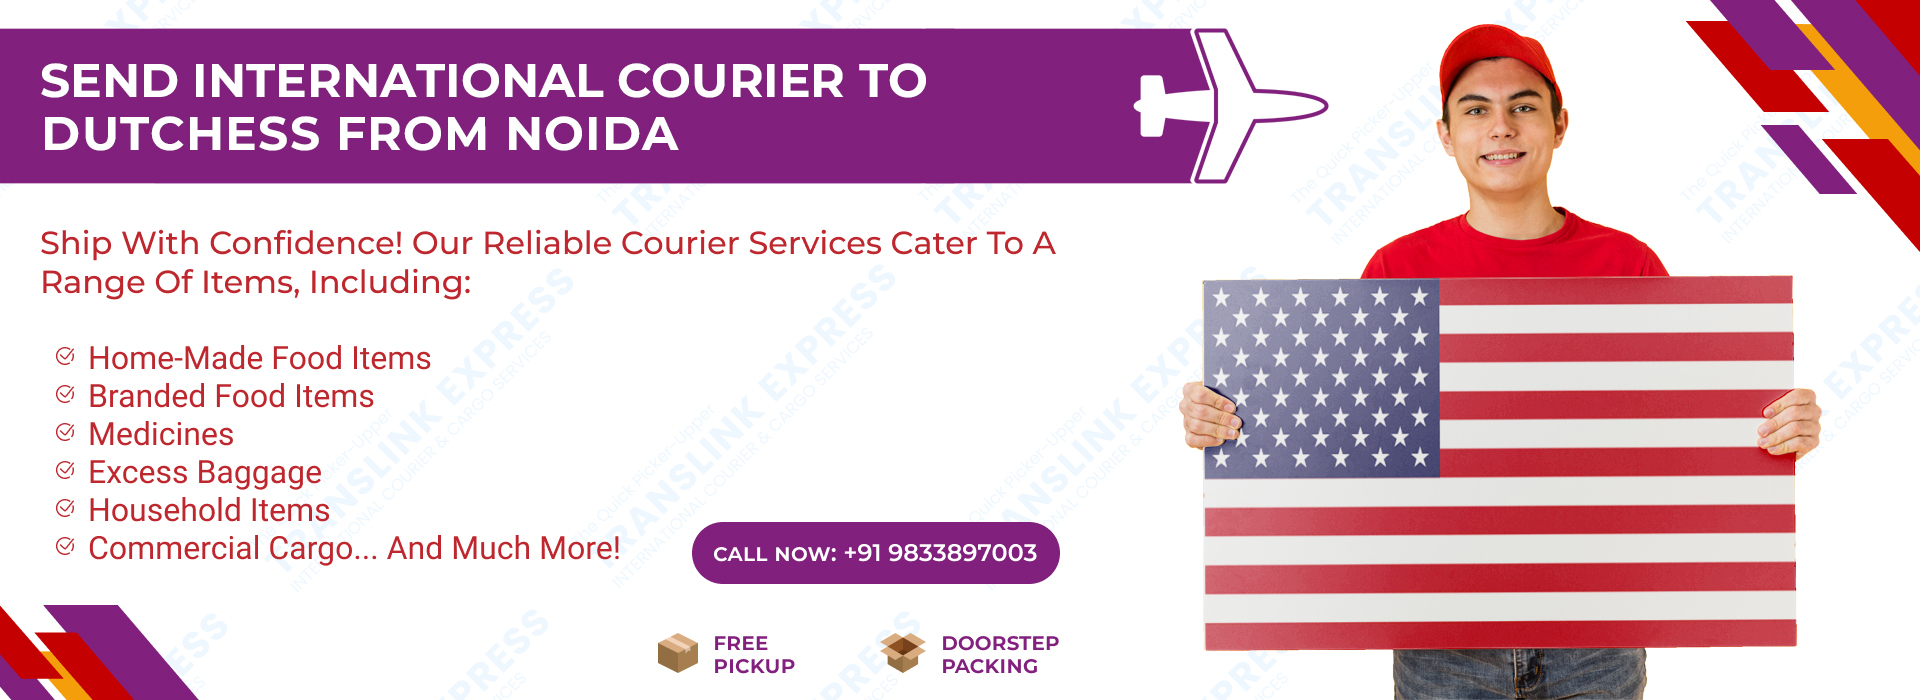 Courier to Dutchess From Noida